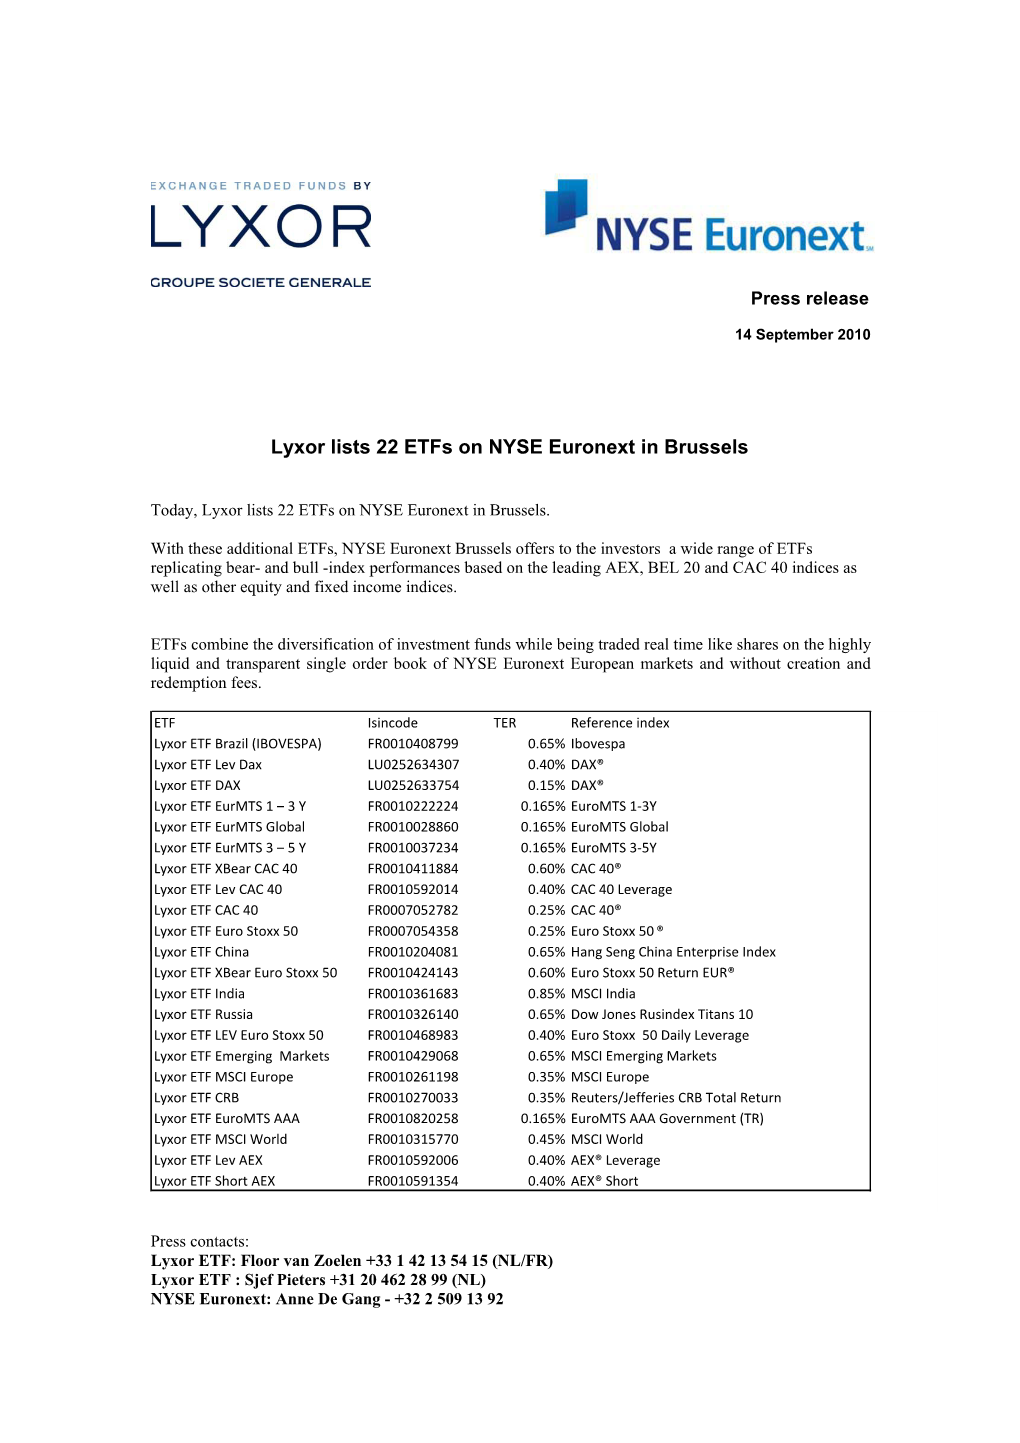 Lyxor Lists 22 Etfs on NYSE Euronext in Brussels